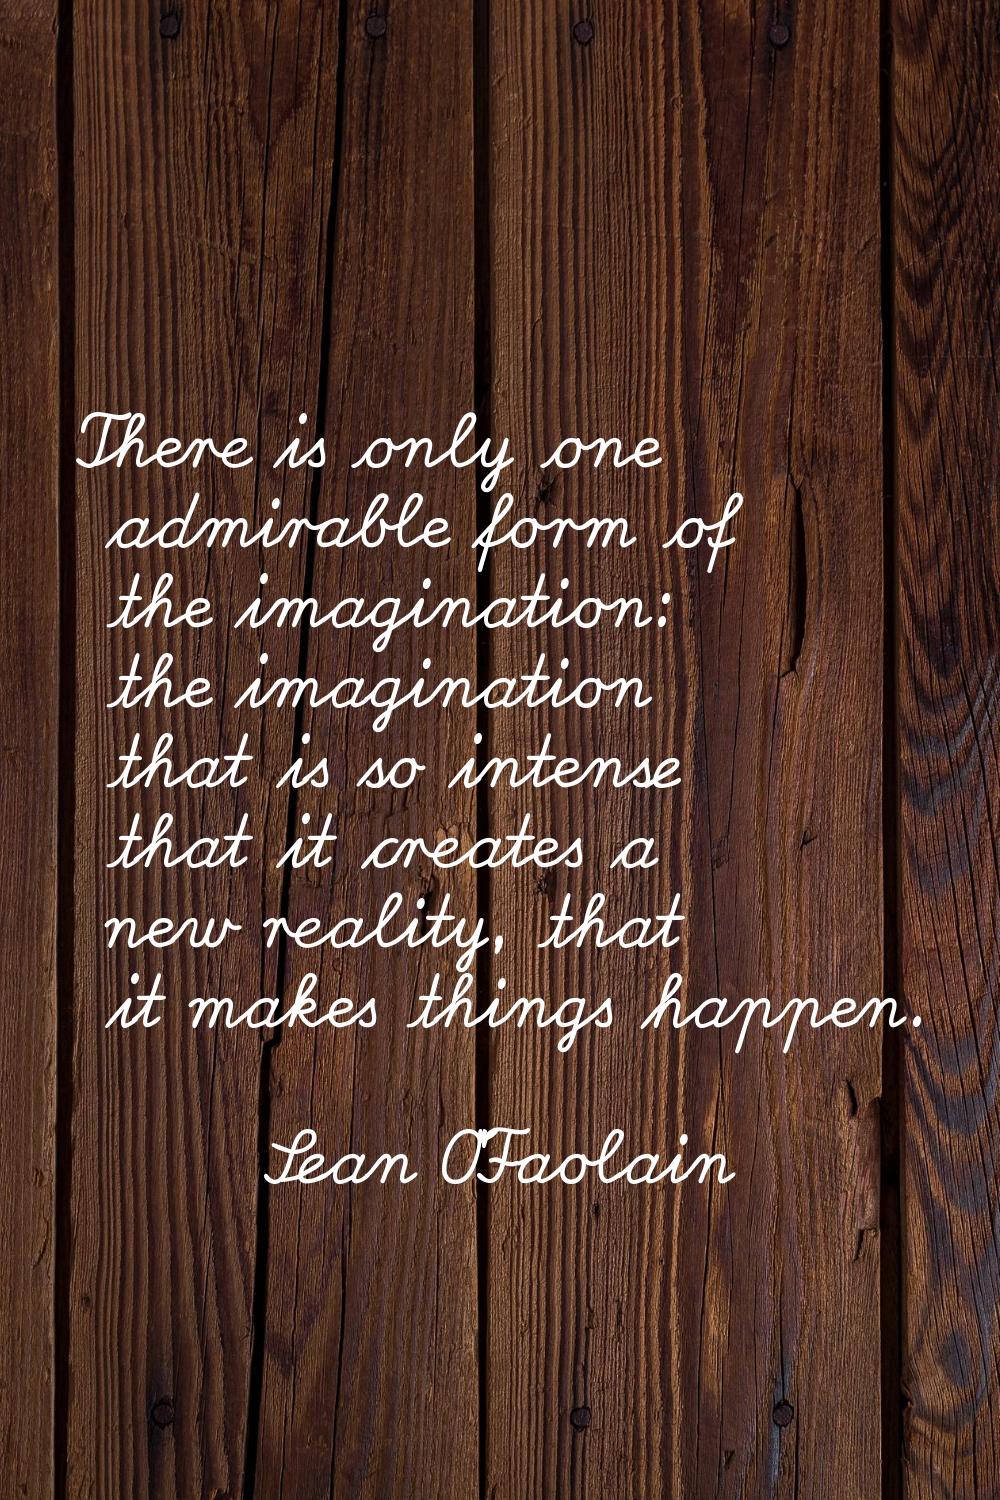 There is only one admirable form of the imagination: the imagination that is so intense that it cre